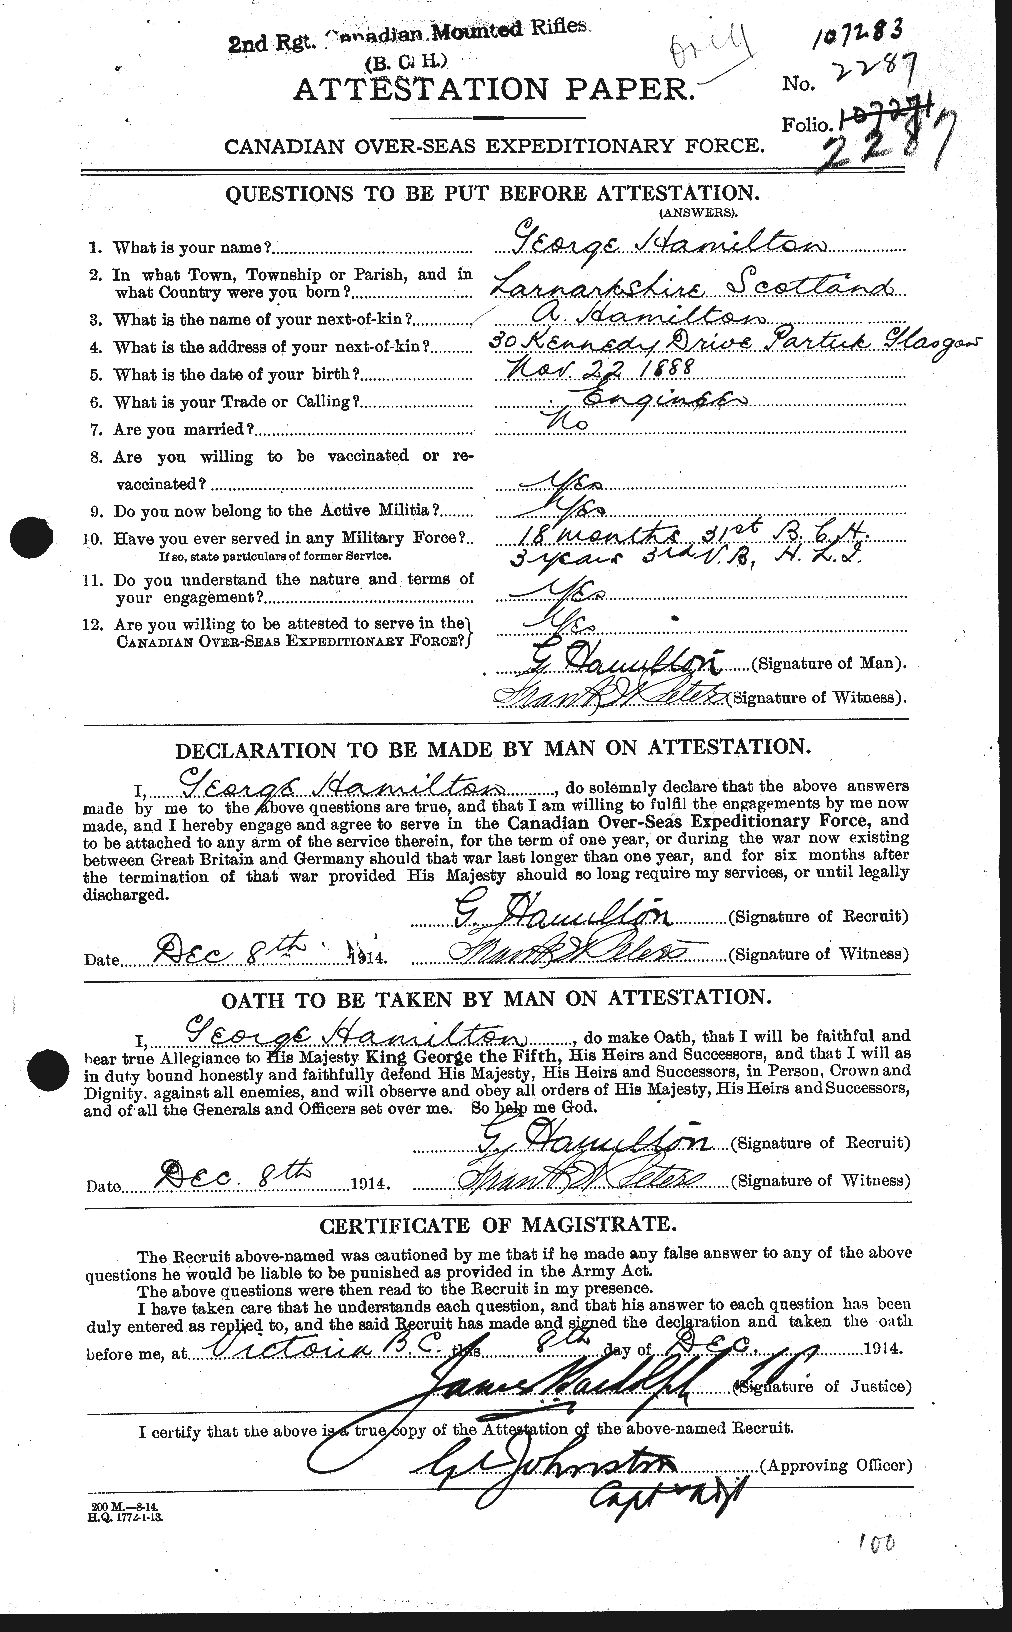 Personnel Records of the First World War - CEF 372442a